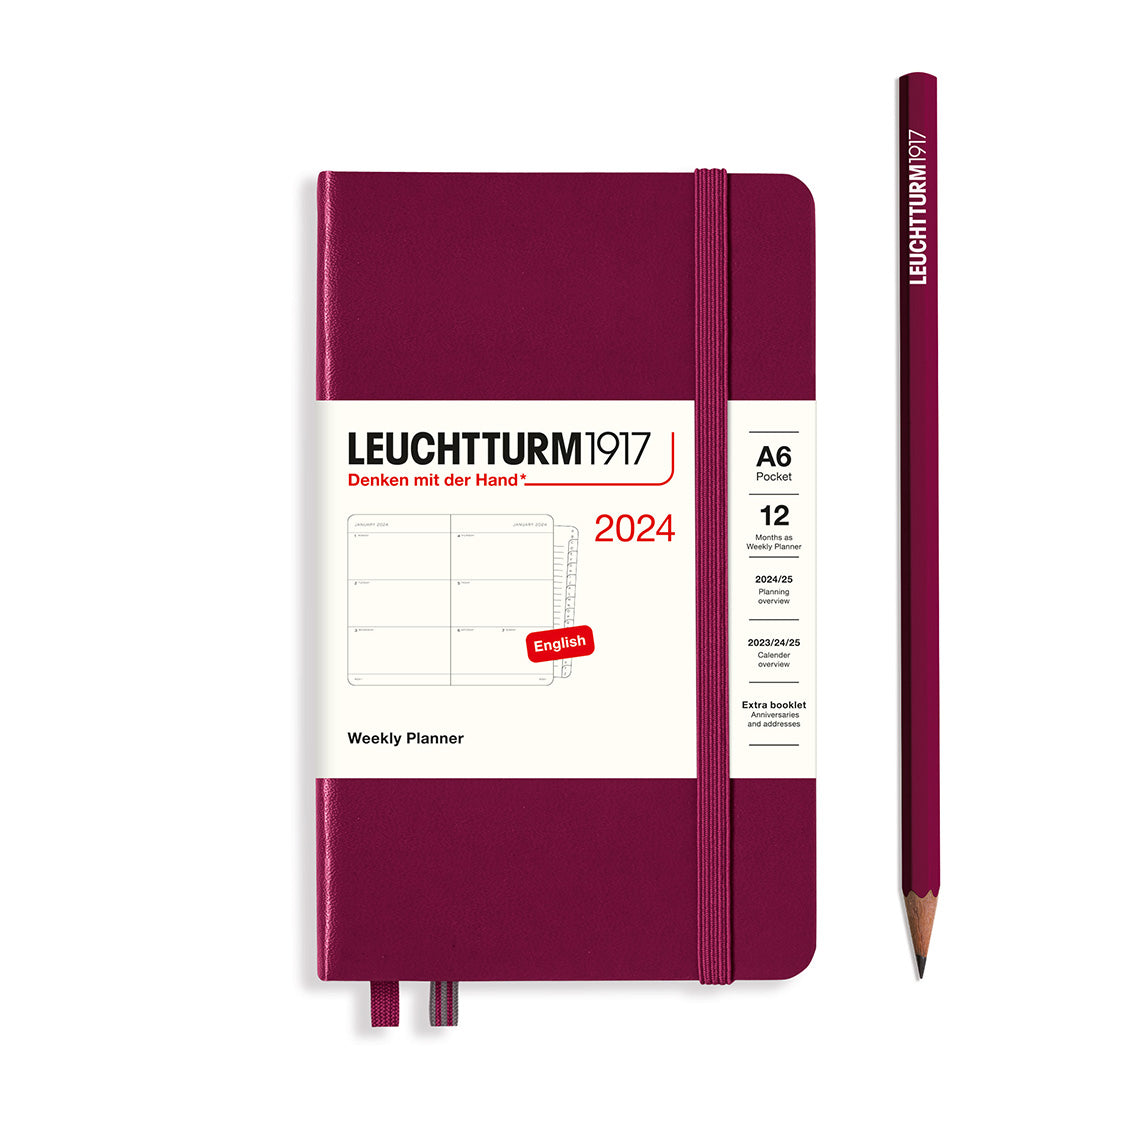 An image of a burgundy planner with a burgundy elastic band holding it together and a cream paper wrap around the middle stating the business name Leuchtturm1917, that it is for the year 2024, it is a weekly planner, is A6 in size and an English language version. It has an image on the wrap showing the inside layout which is a week spread across 2 pages. A burgundy pencil is shown at the side of the planner.